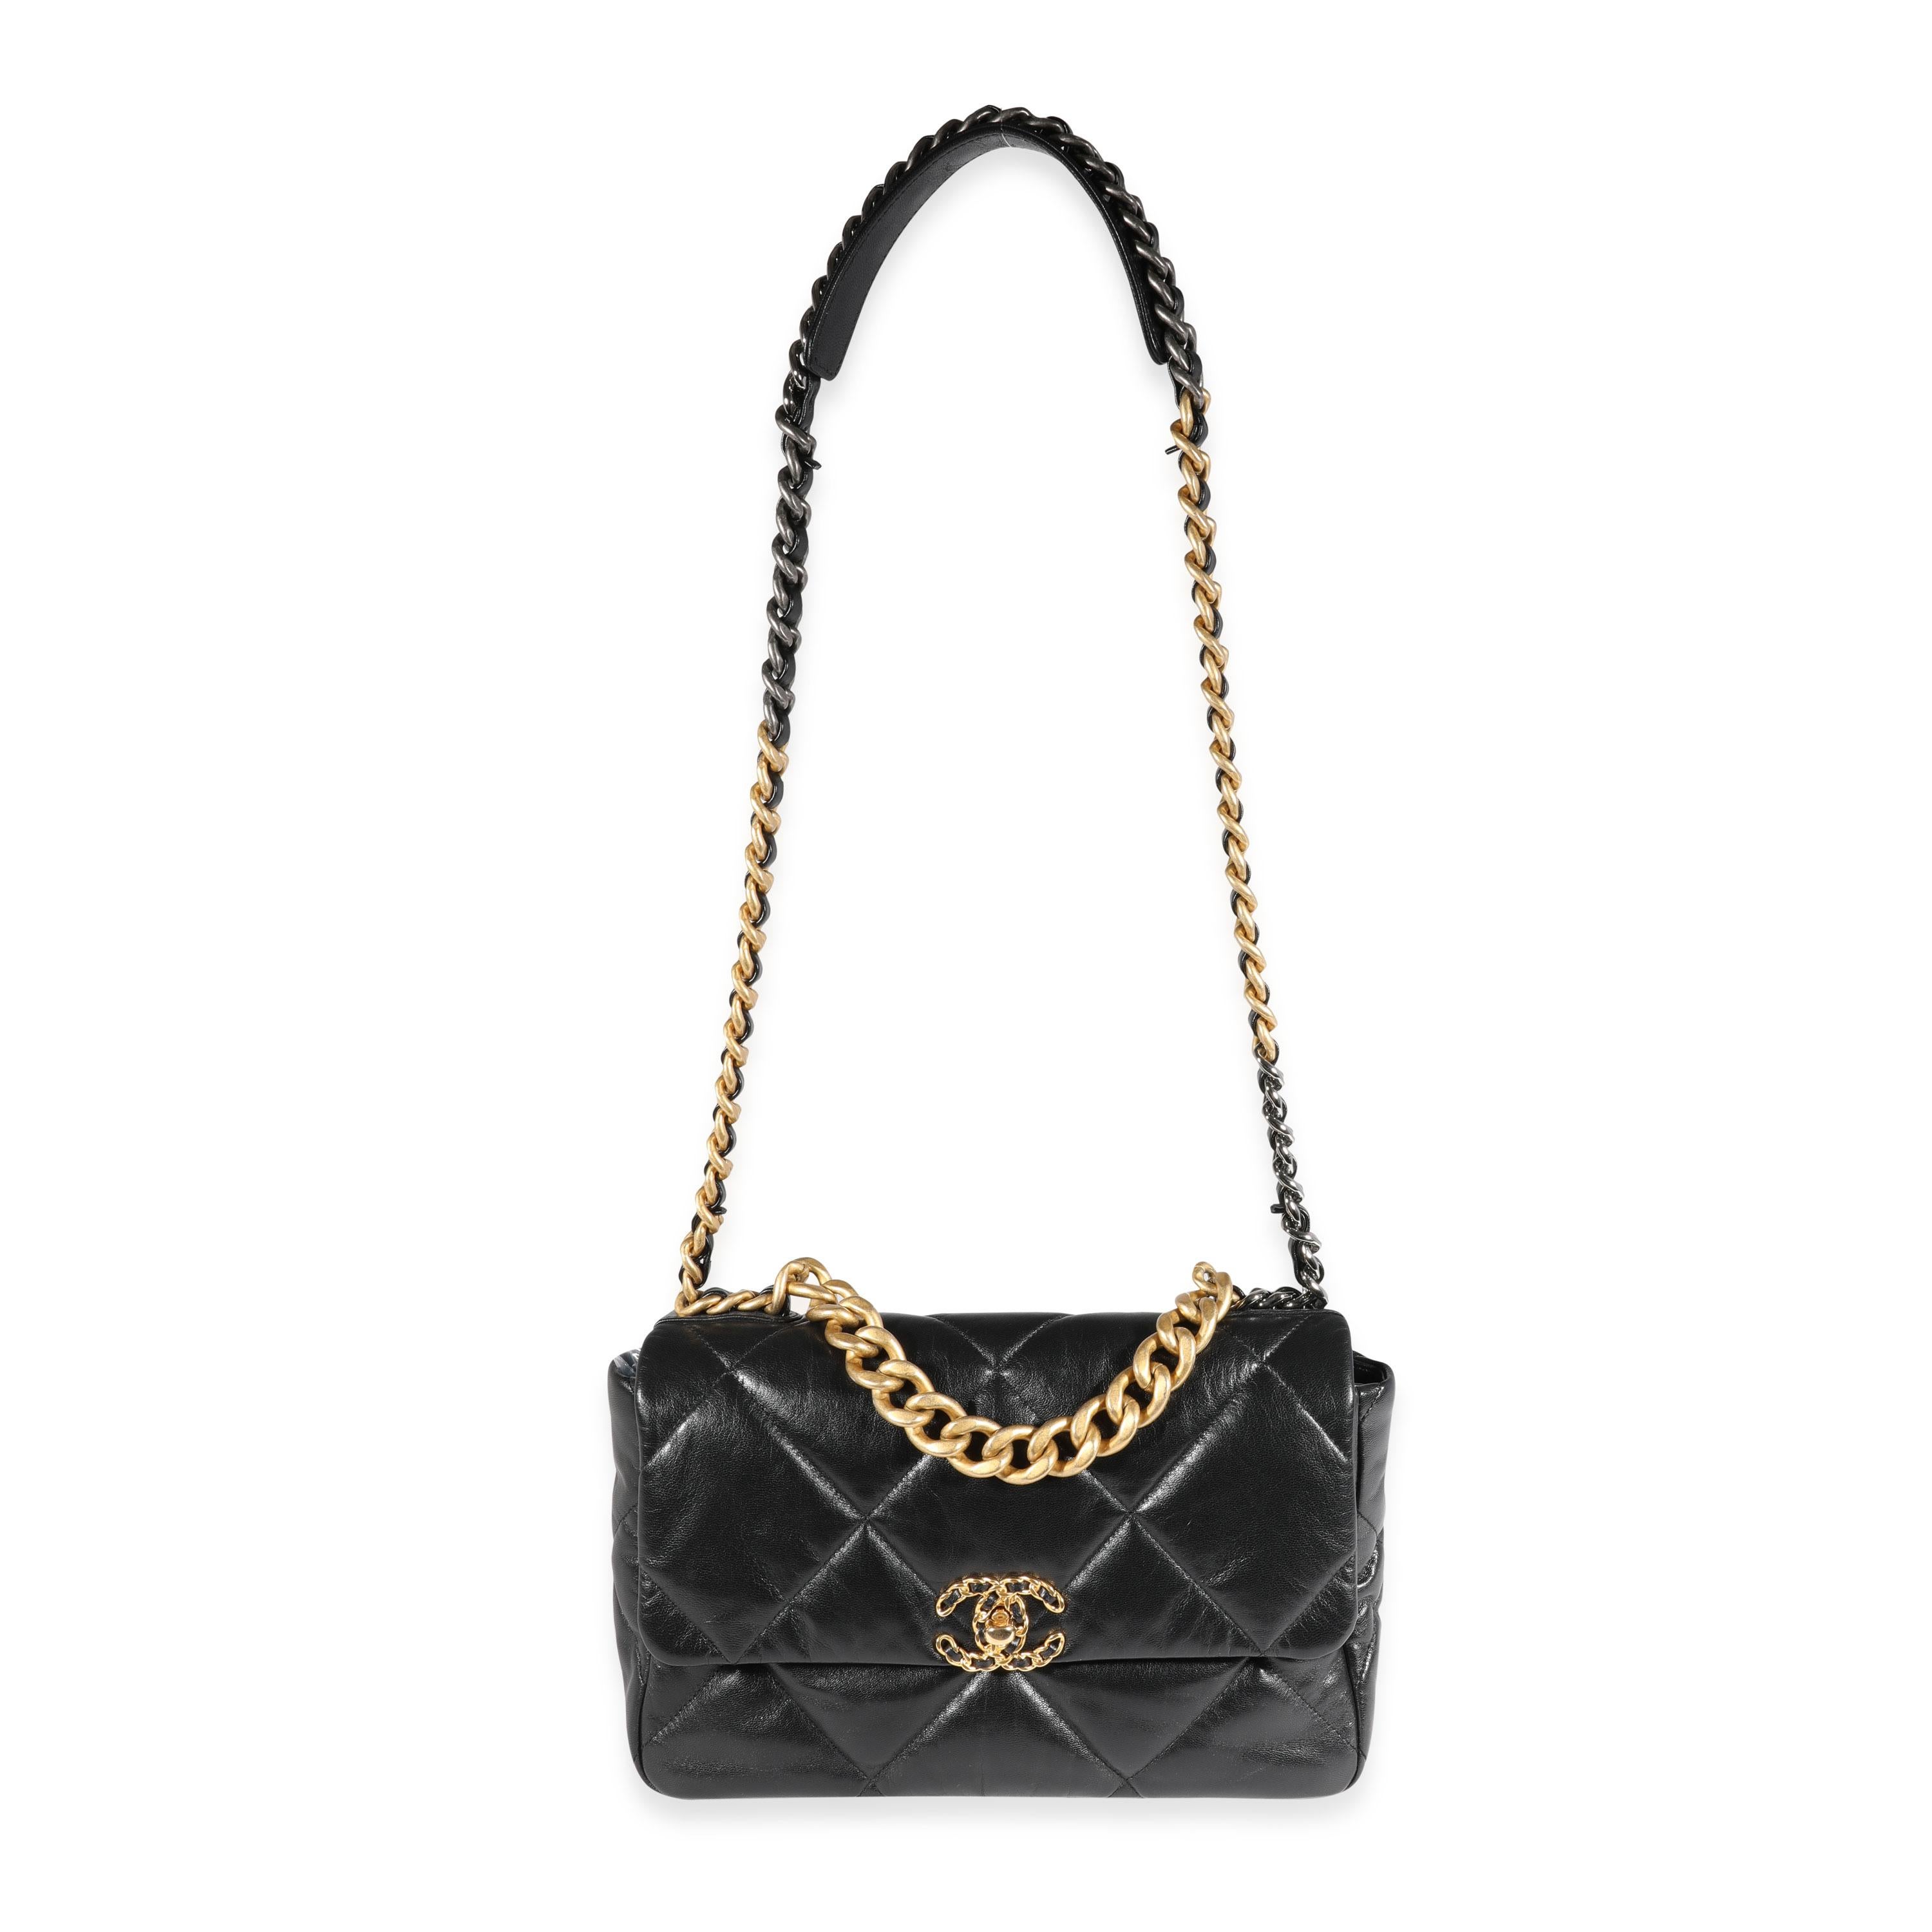 Listing Title: Chanel Black Quilted Lambskin Chanel 19 Large Flap Bag
SKU: 121606
MSRP: 6300.00
Condition: Pre-owned 
Handbag Condition: Excellent
Condition Comments: Excellent Condition. Plastic on some hardware. Scuffing under flap. No other